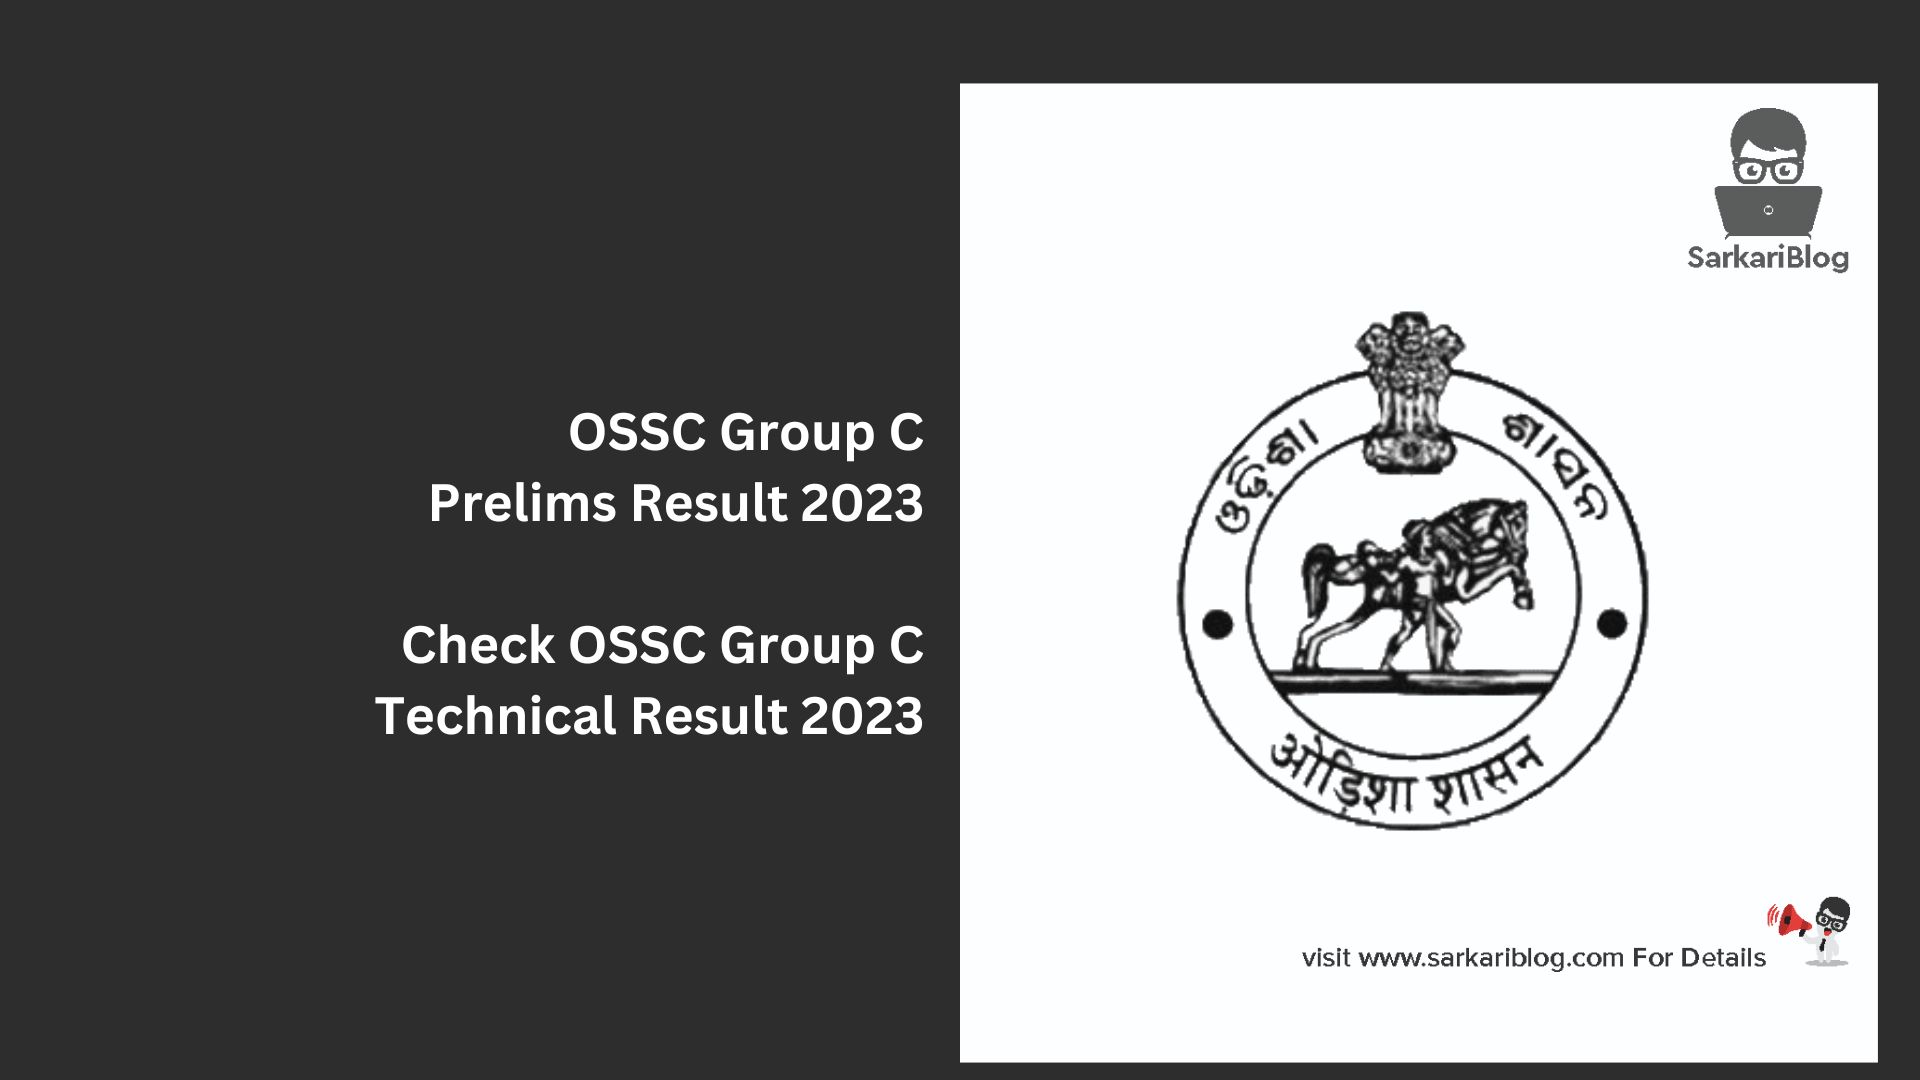 OSSC Group C Prelims Result 2023